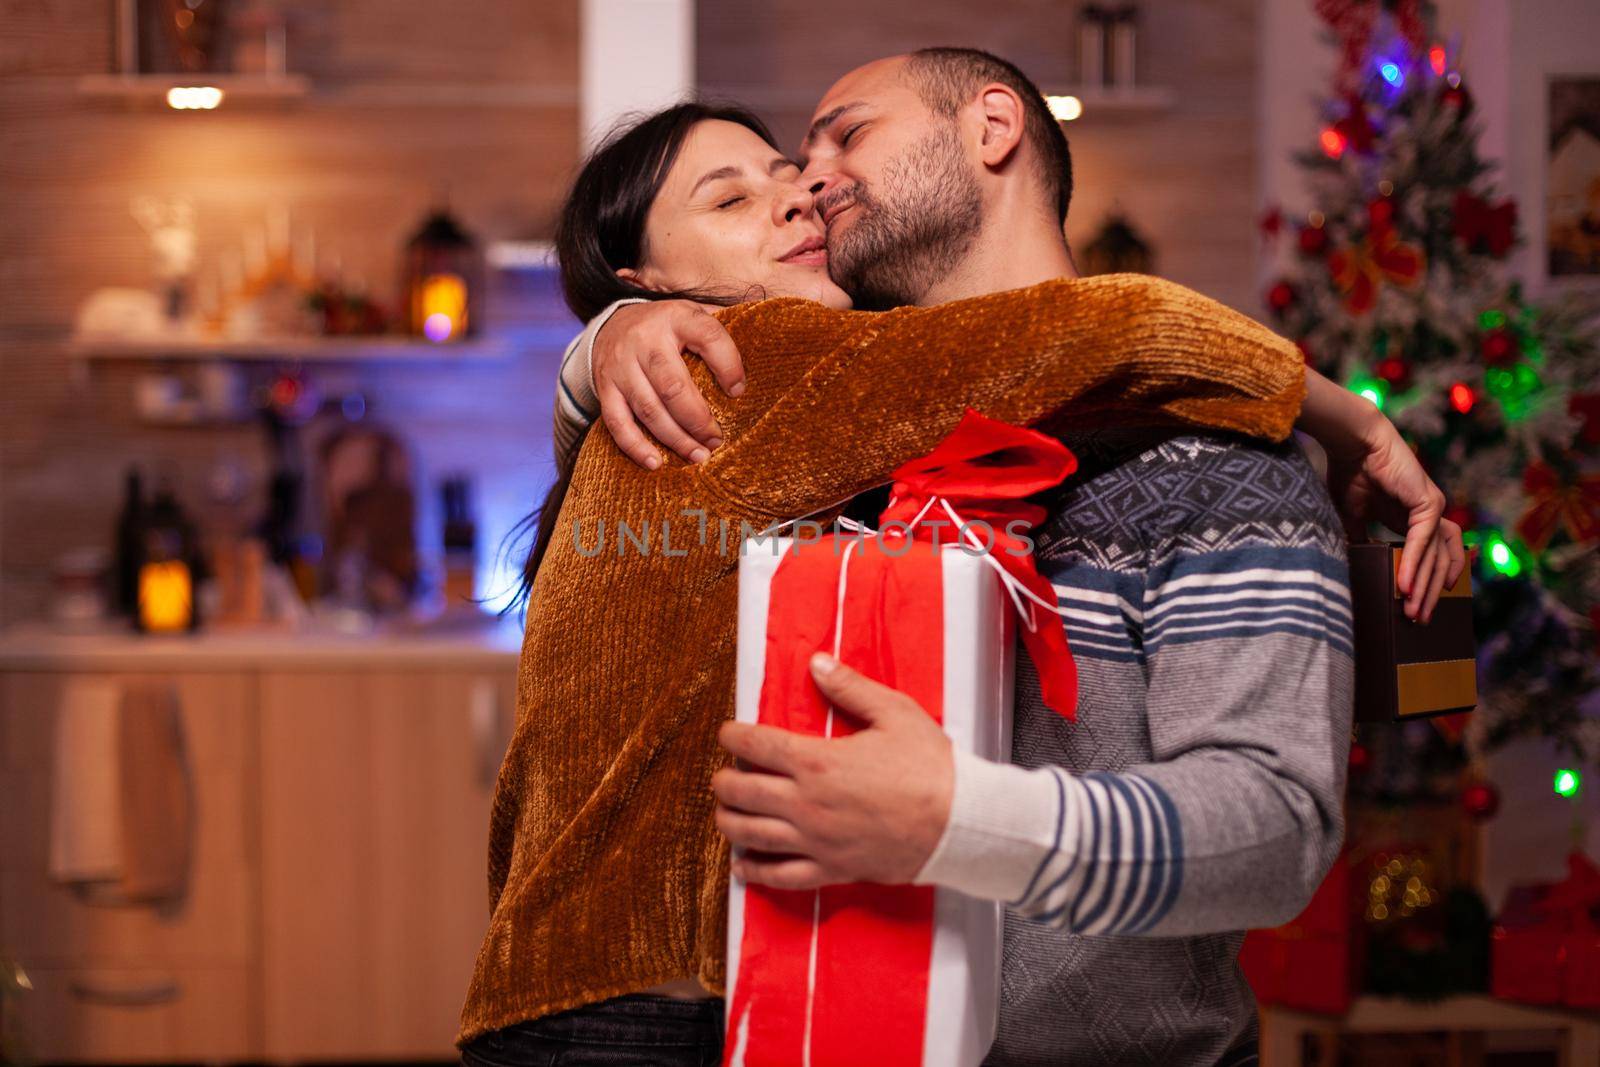 Happy family enjoying spending time together during christmas holiday holding xmas decorated present gift with ribbon on it. Excited married couple hugging celebrating winter festive season